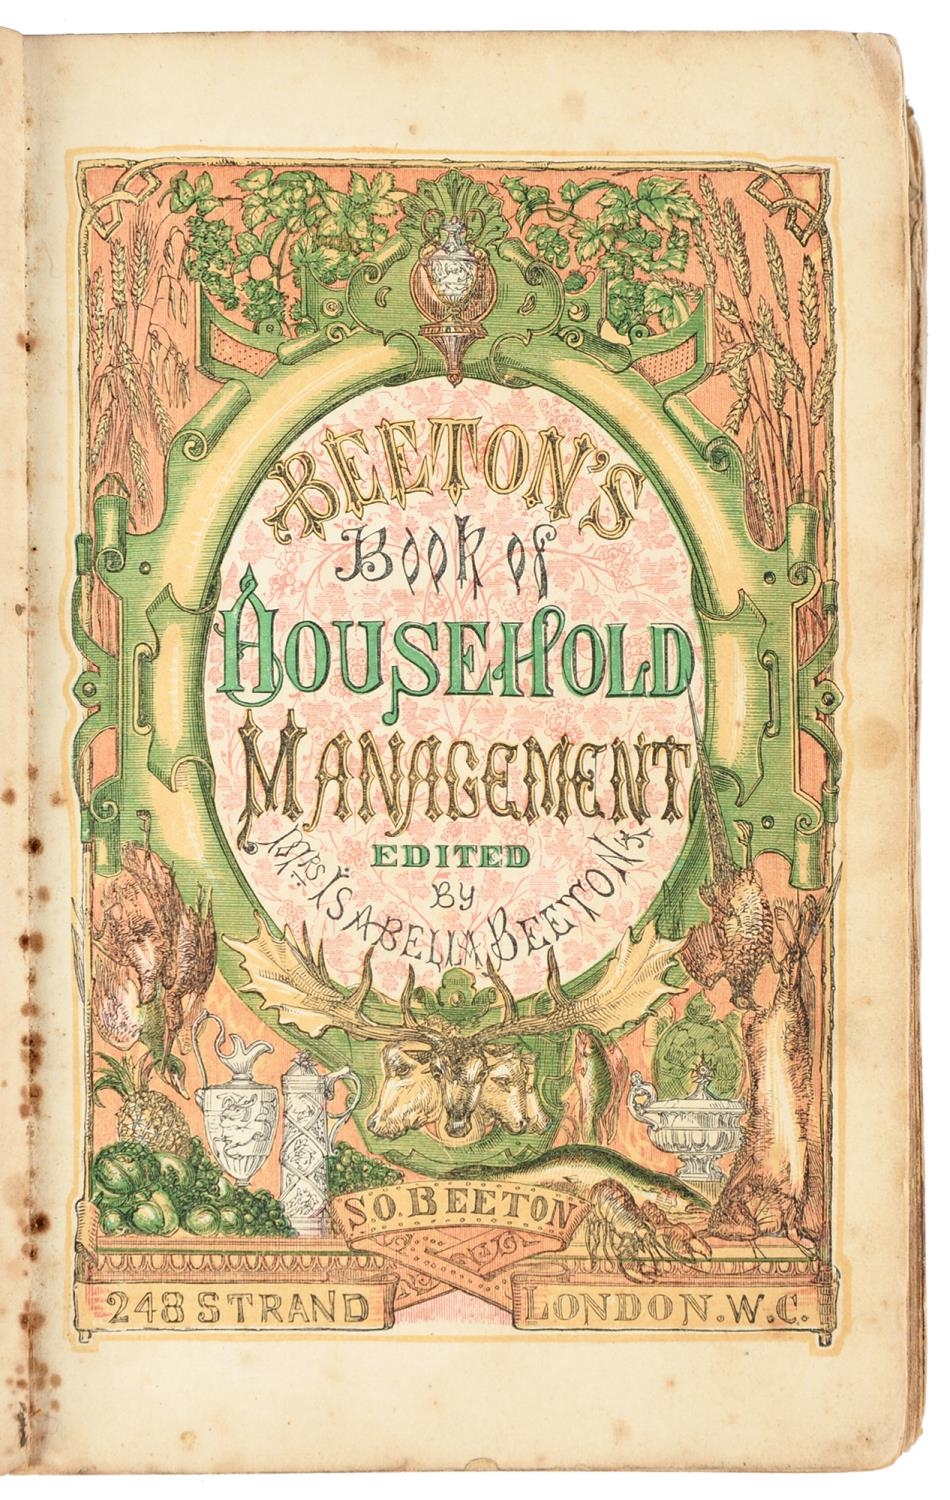 Cookery. Beeton (Mrs. Isabella), The Book of Household Management, first edition thus, London: S.